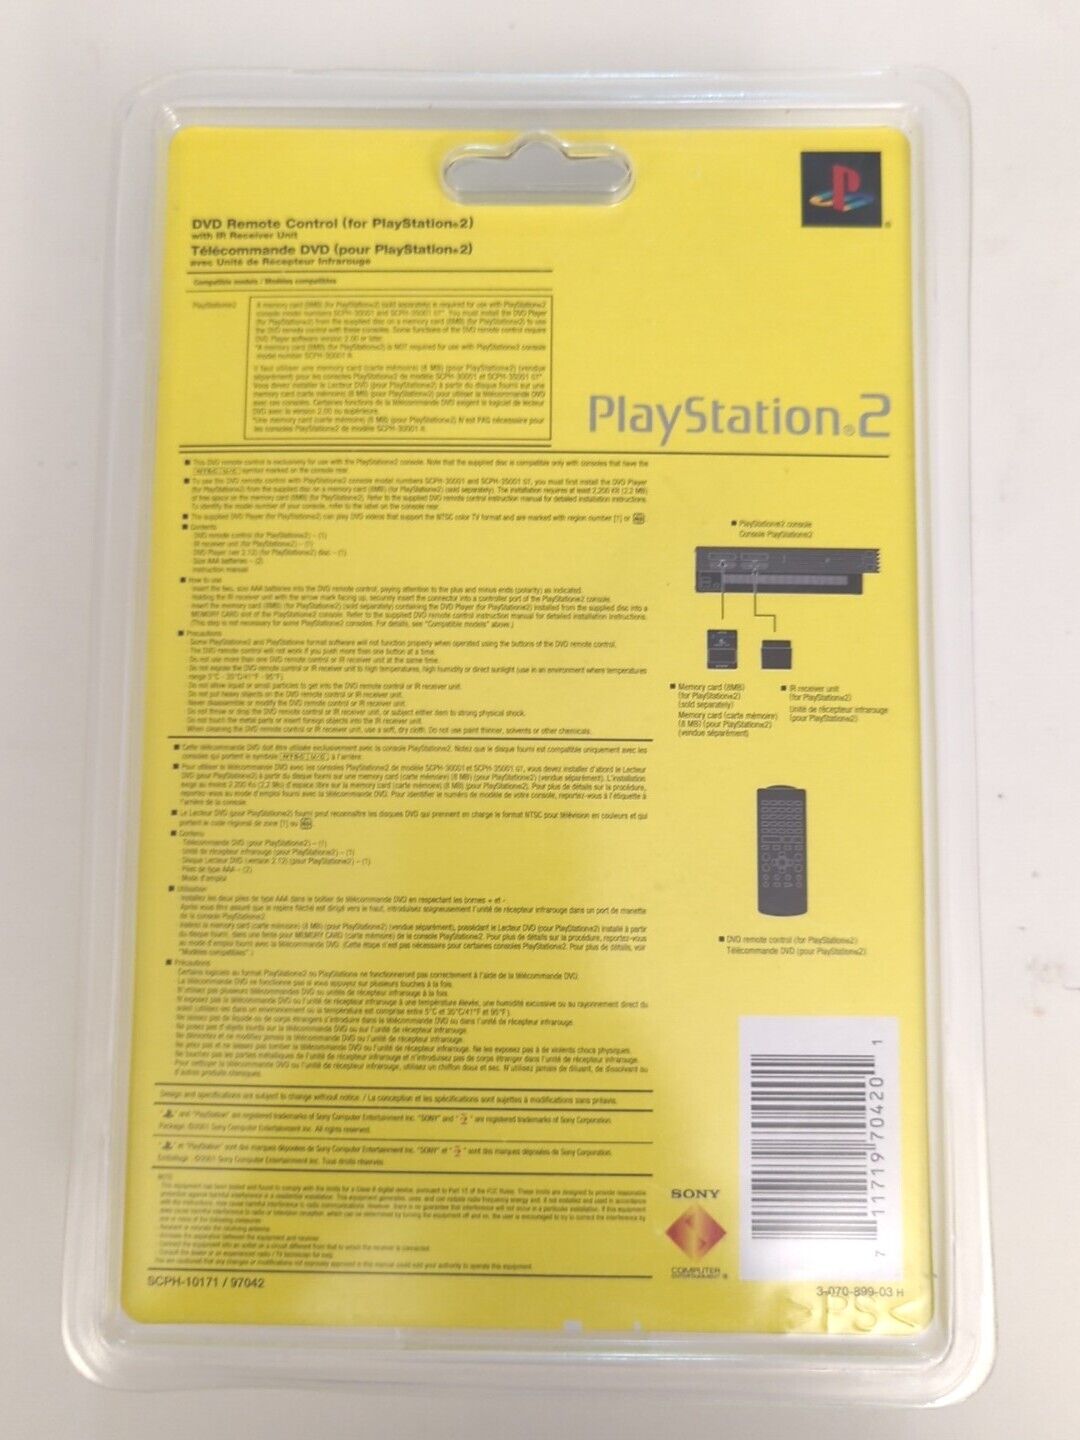 Sony PlayStation 2 PS2 DVD Remote Control SCPH10171 97042  NEW FACTORY SEALED